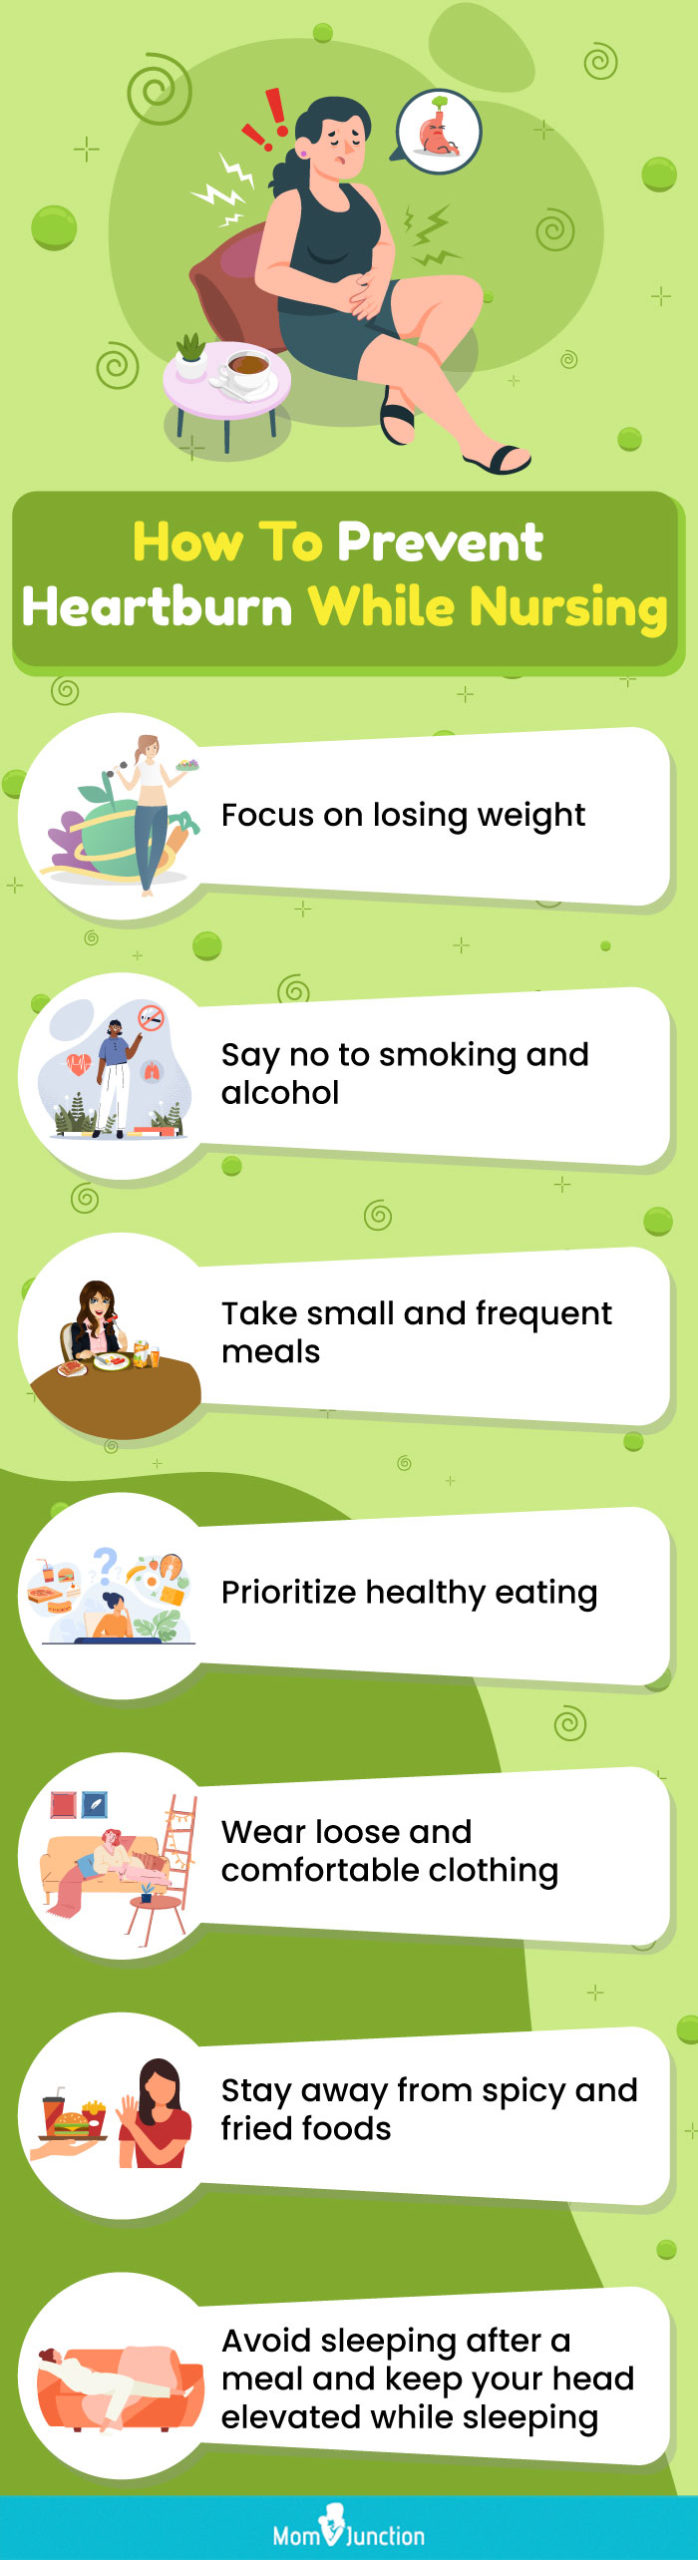 how to prevent heartburn while nursing (infographic)